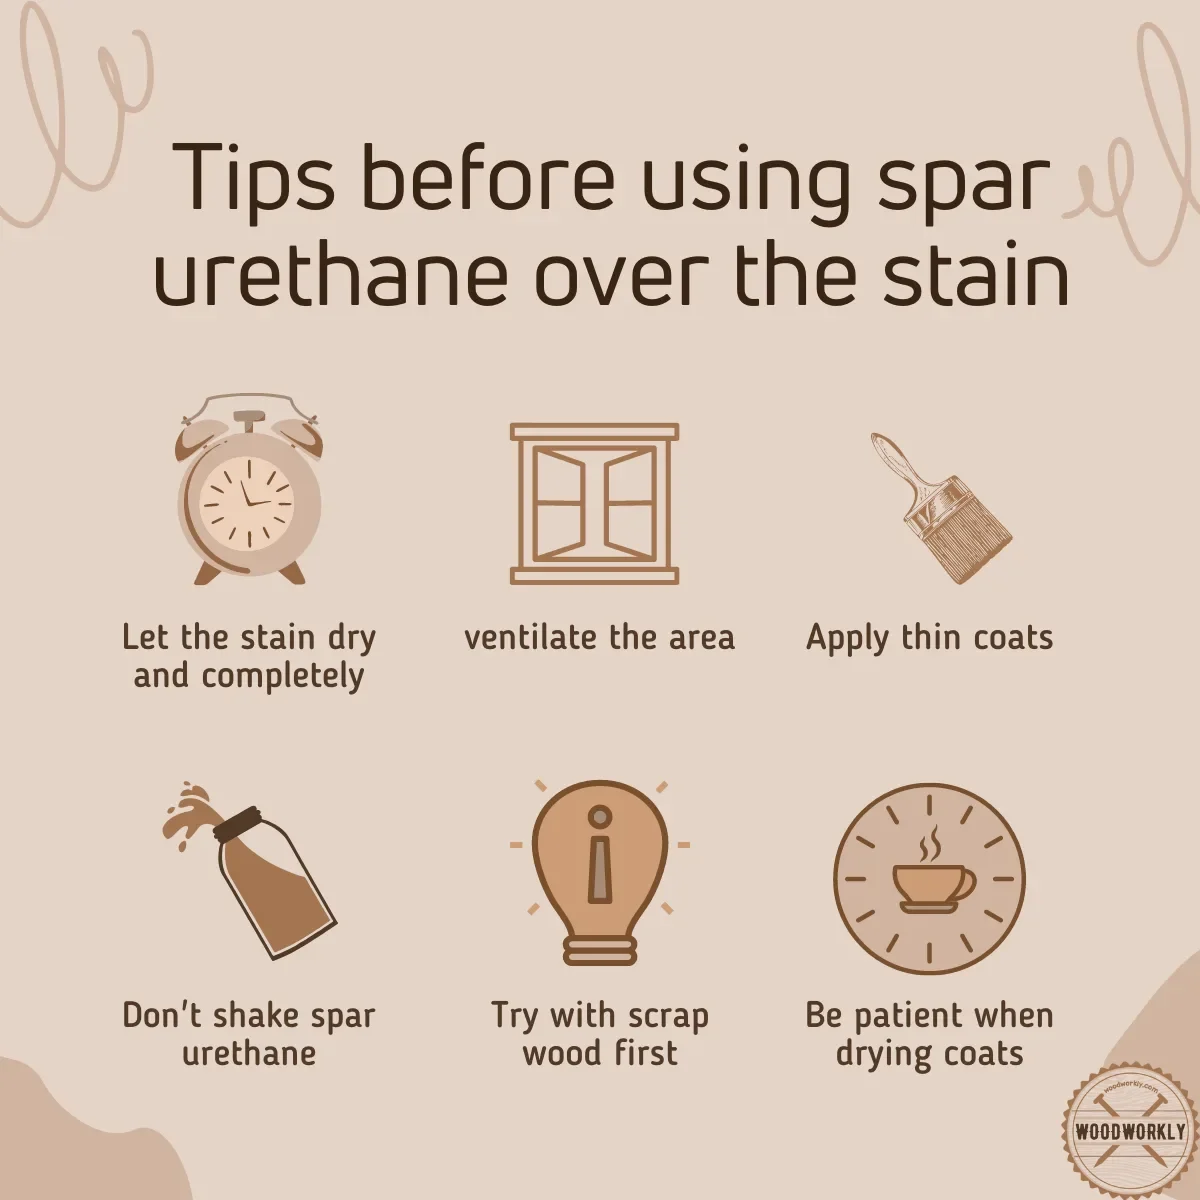 Tips before using spar urethane over the stain